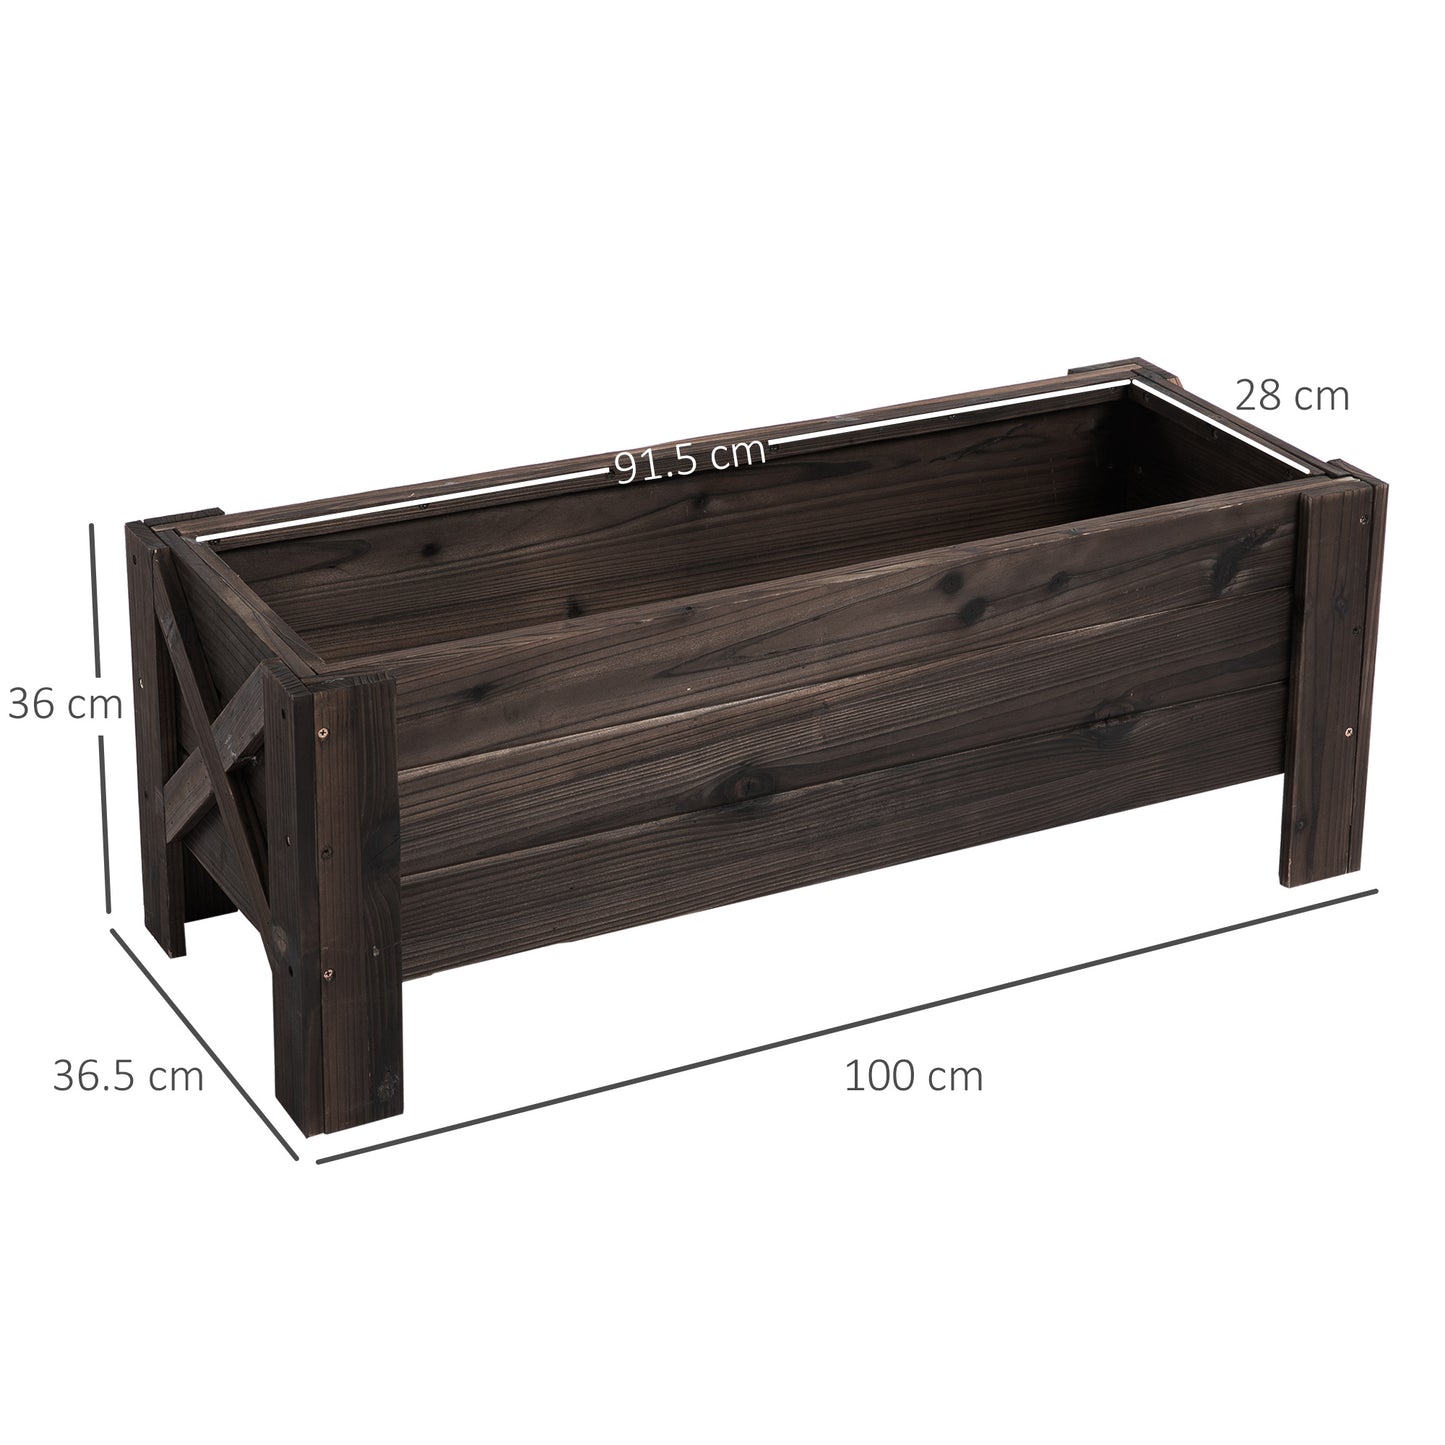 Outsunny Wooden Garden Raised Bed Planter Grow Containers Patio Flower Vegetable Pot